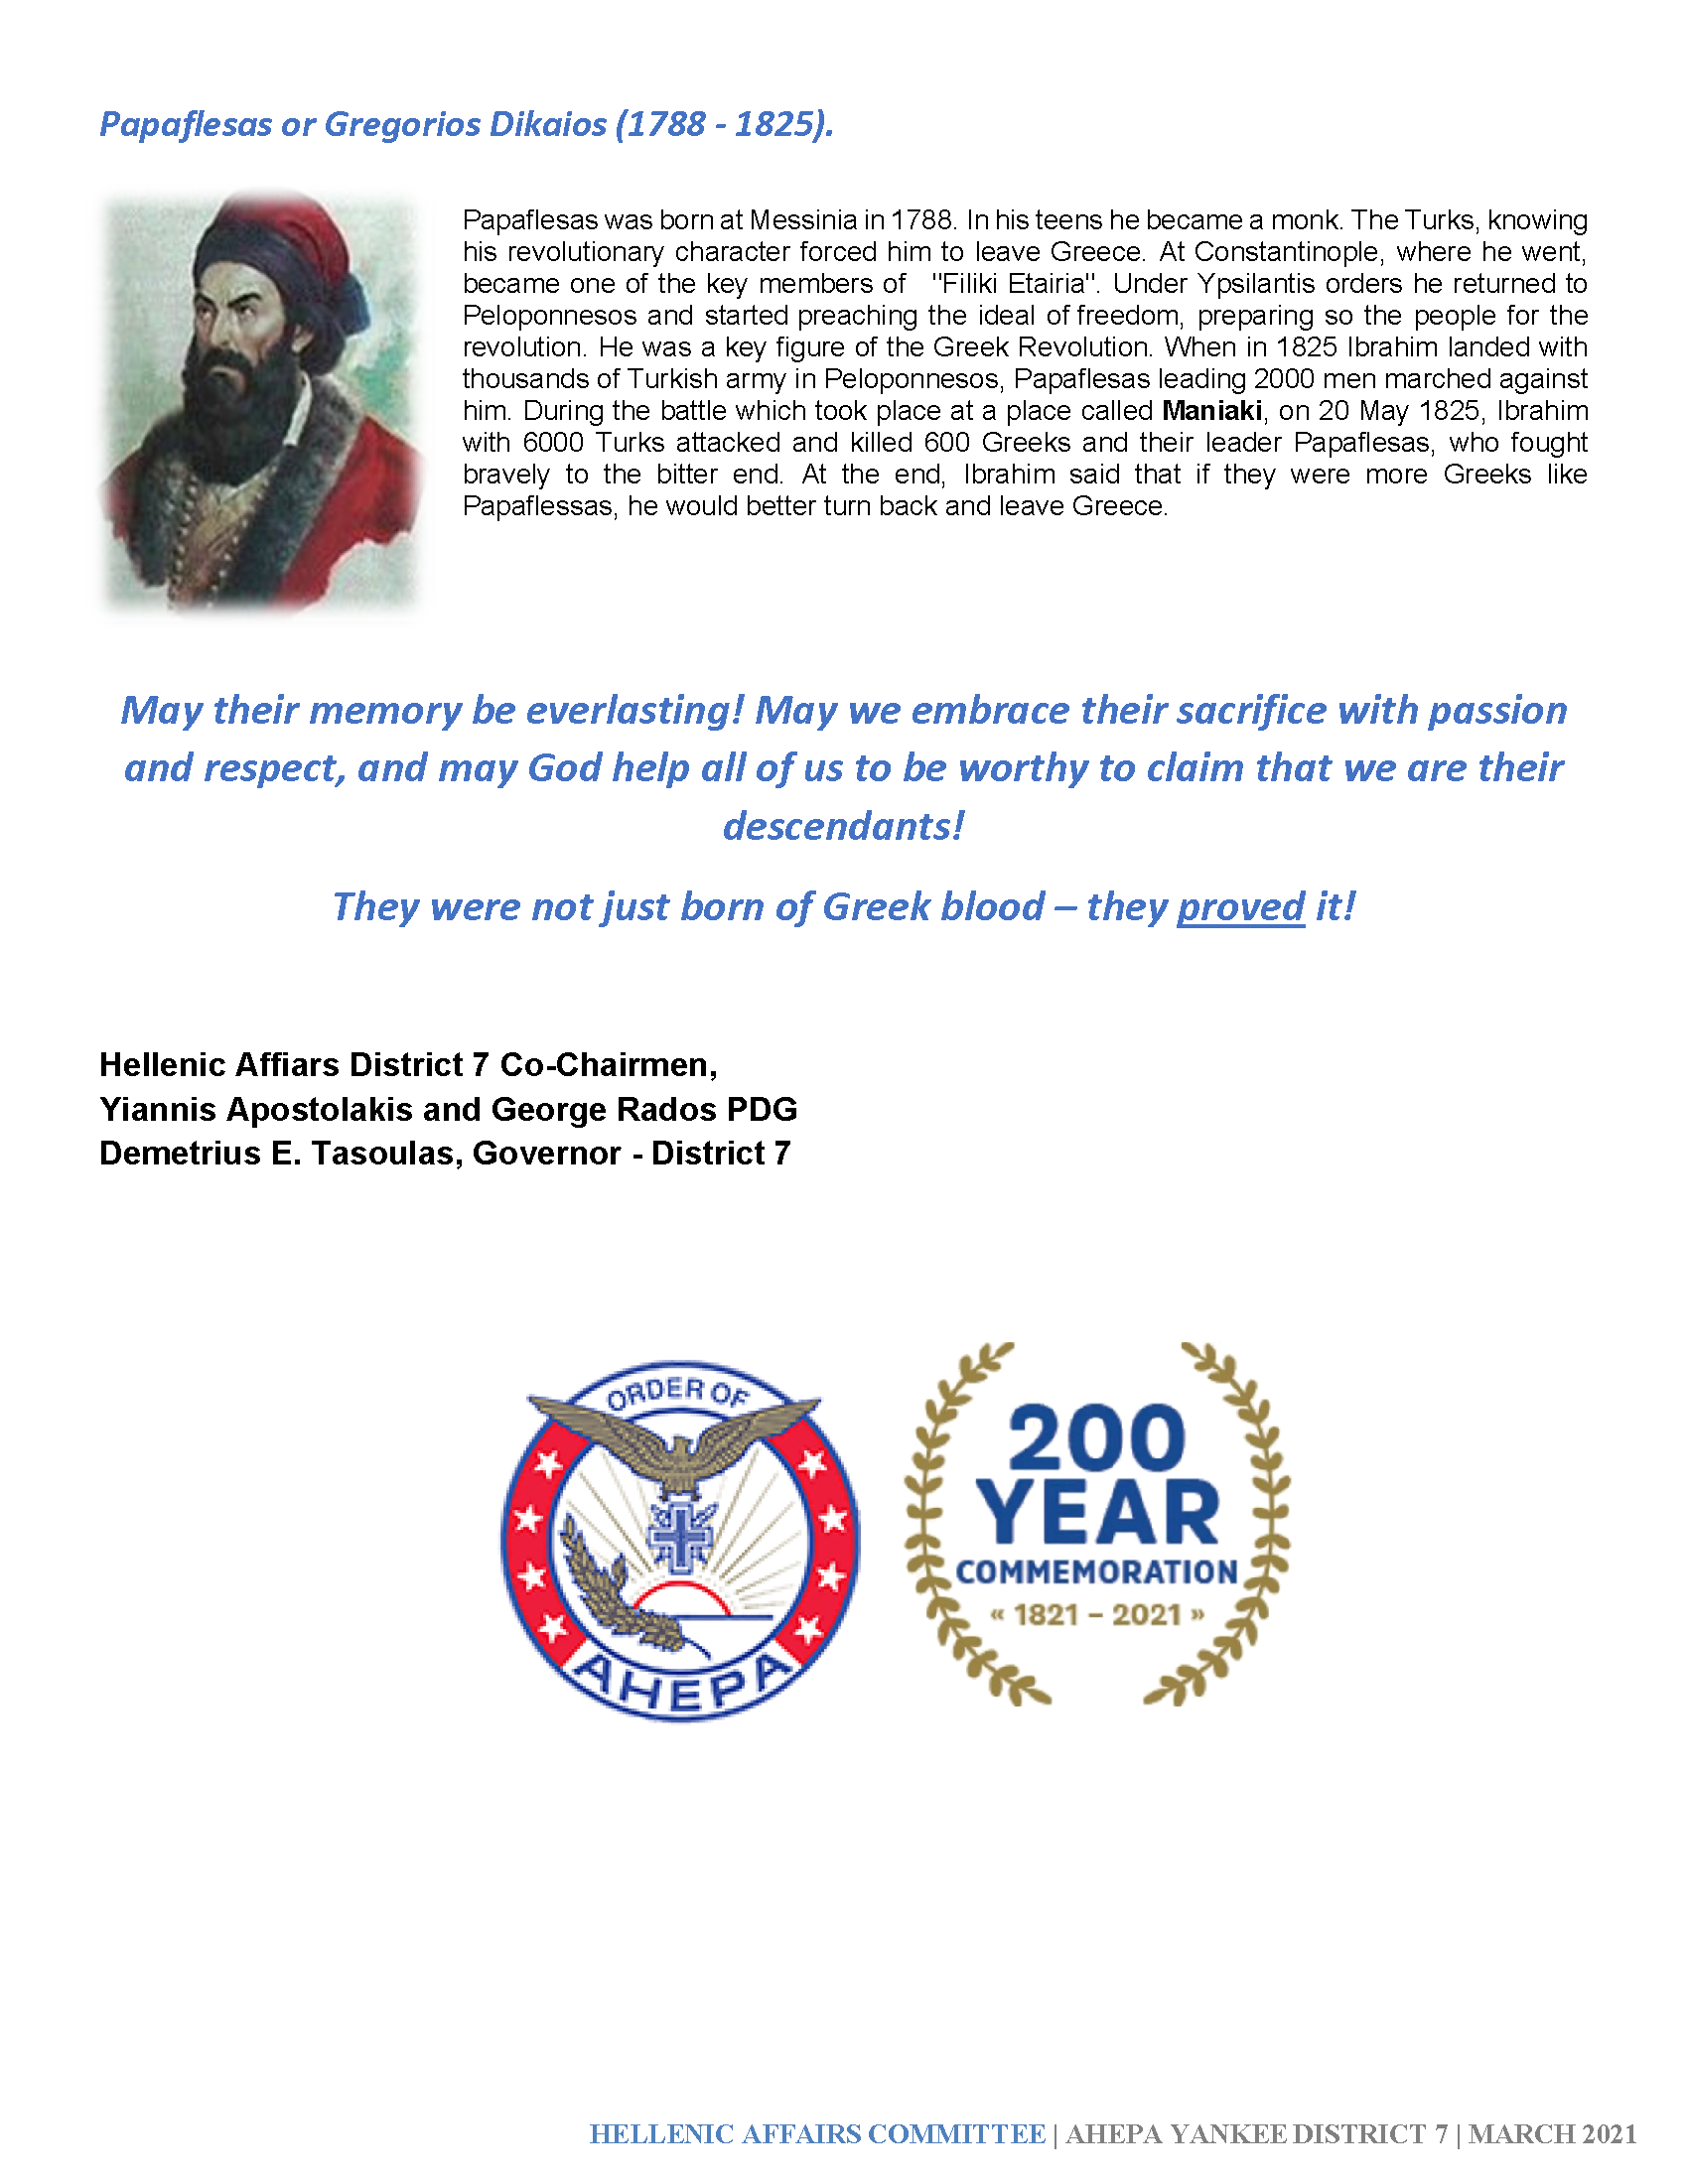 HELLENIC AFFAIRS COMMITTEE | AHEPA YANKEE DISTRICT 7 | MARCH 2021